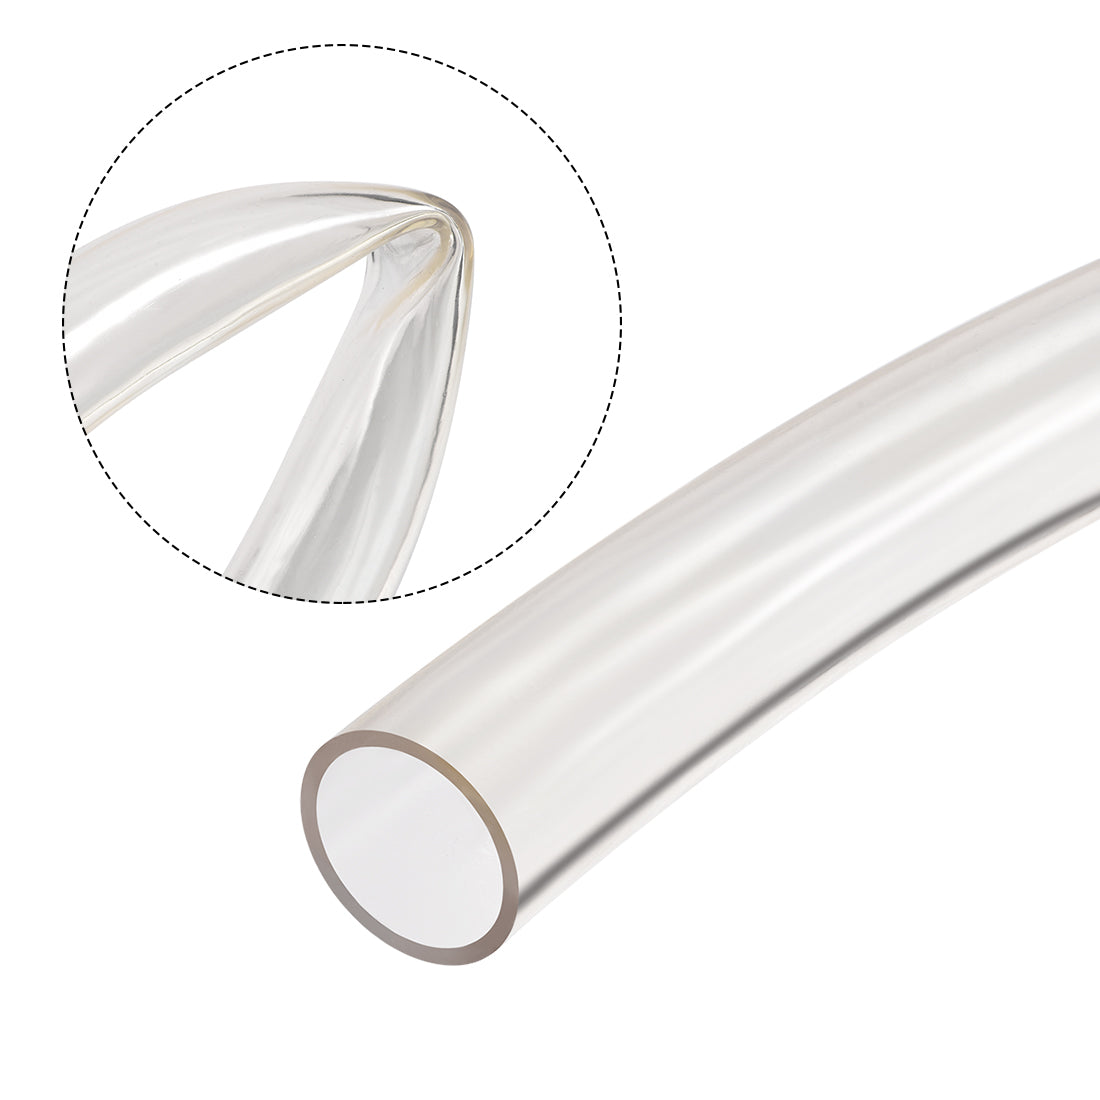 Uxcell Uxcell PVC Clear Vinly Tubing,18mm ID x 21mm OD,1 Meter/ 3.28ft,Plastic Flexible Hose Tube,Flex Pipe for Water,Beverage Pump